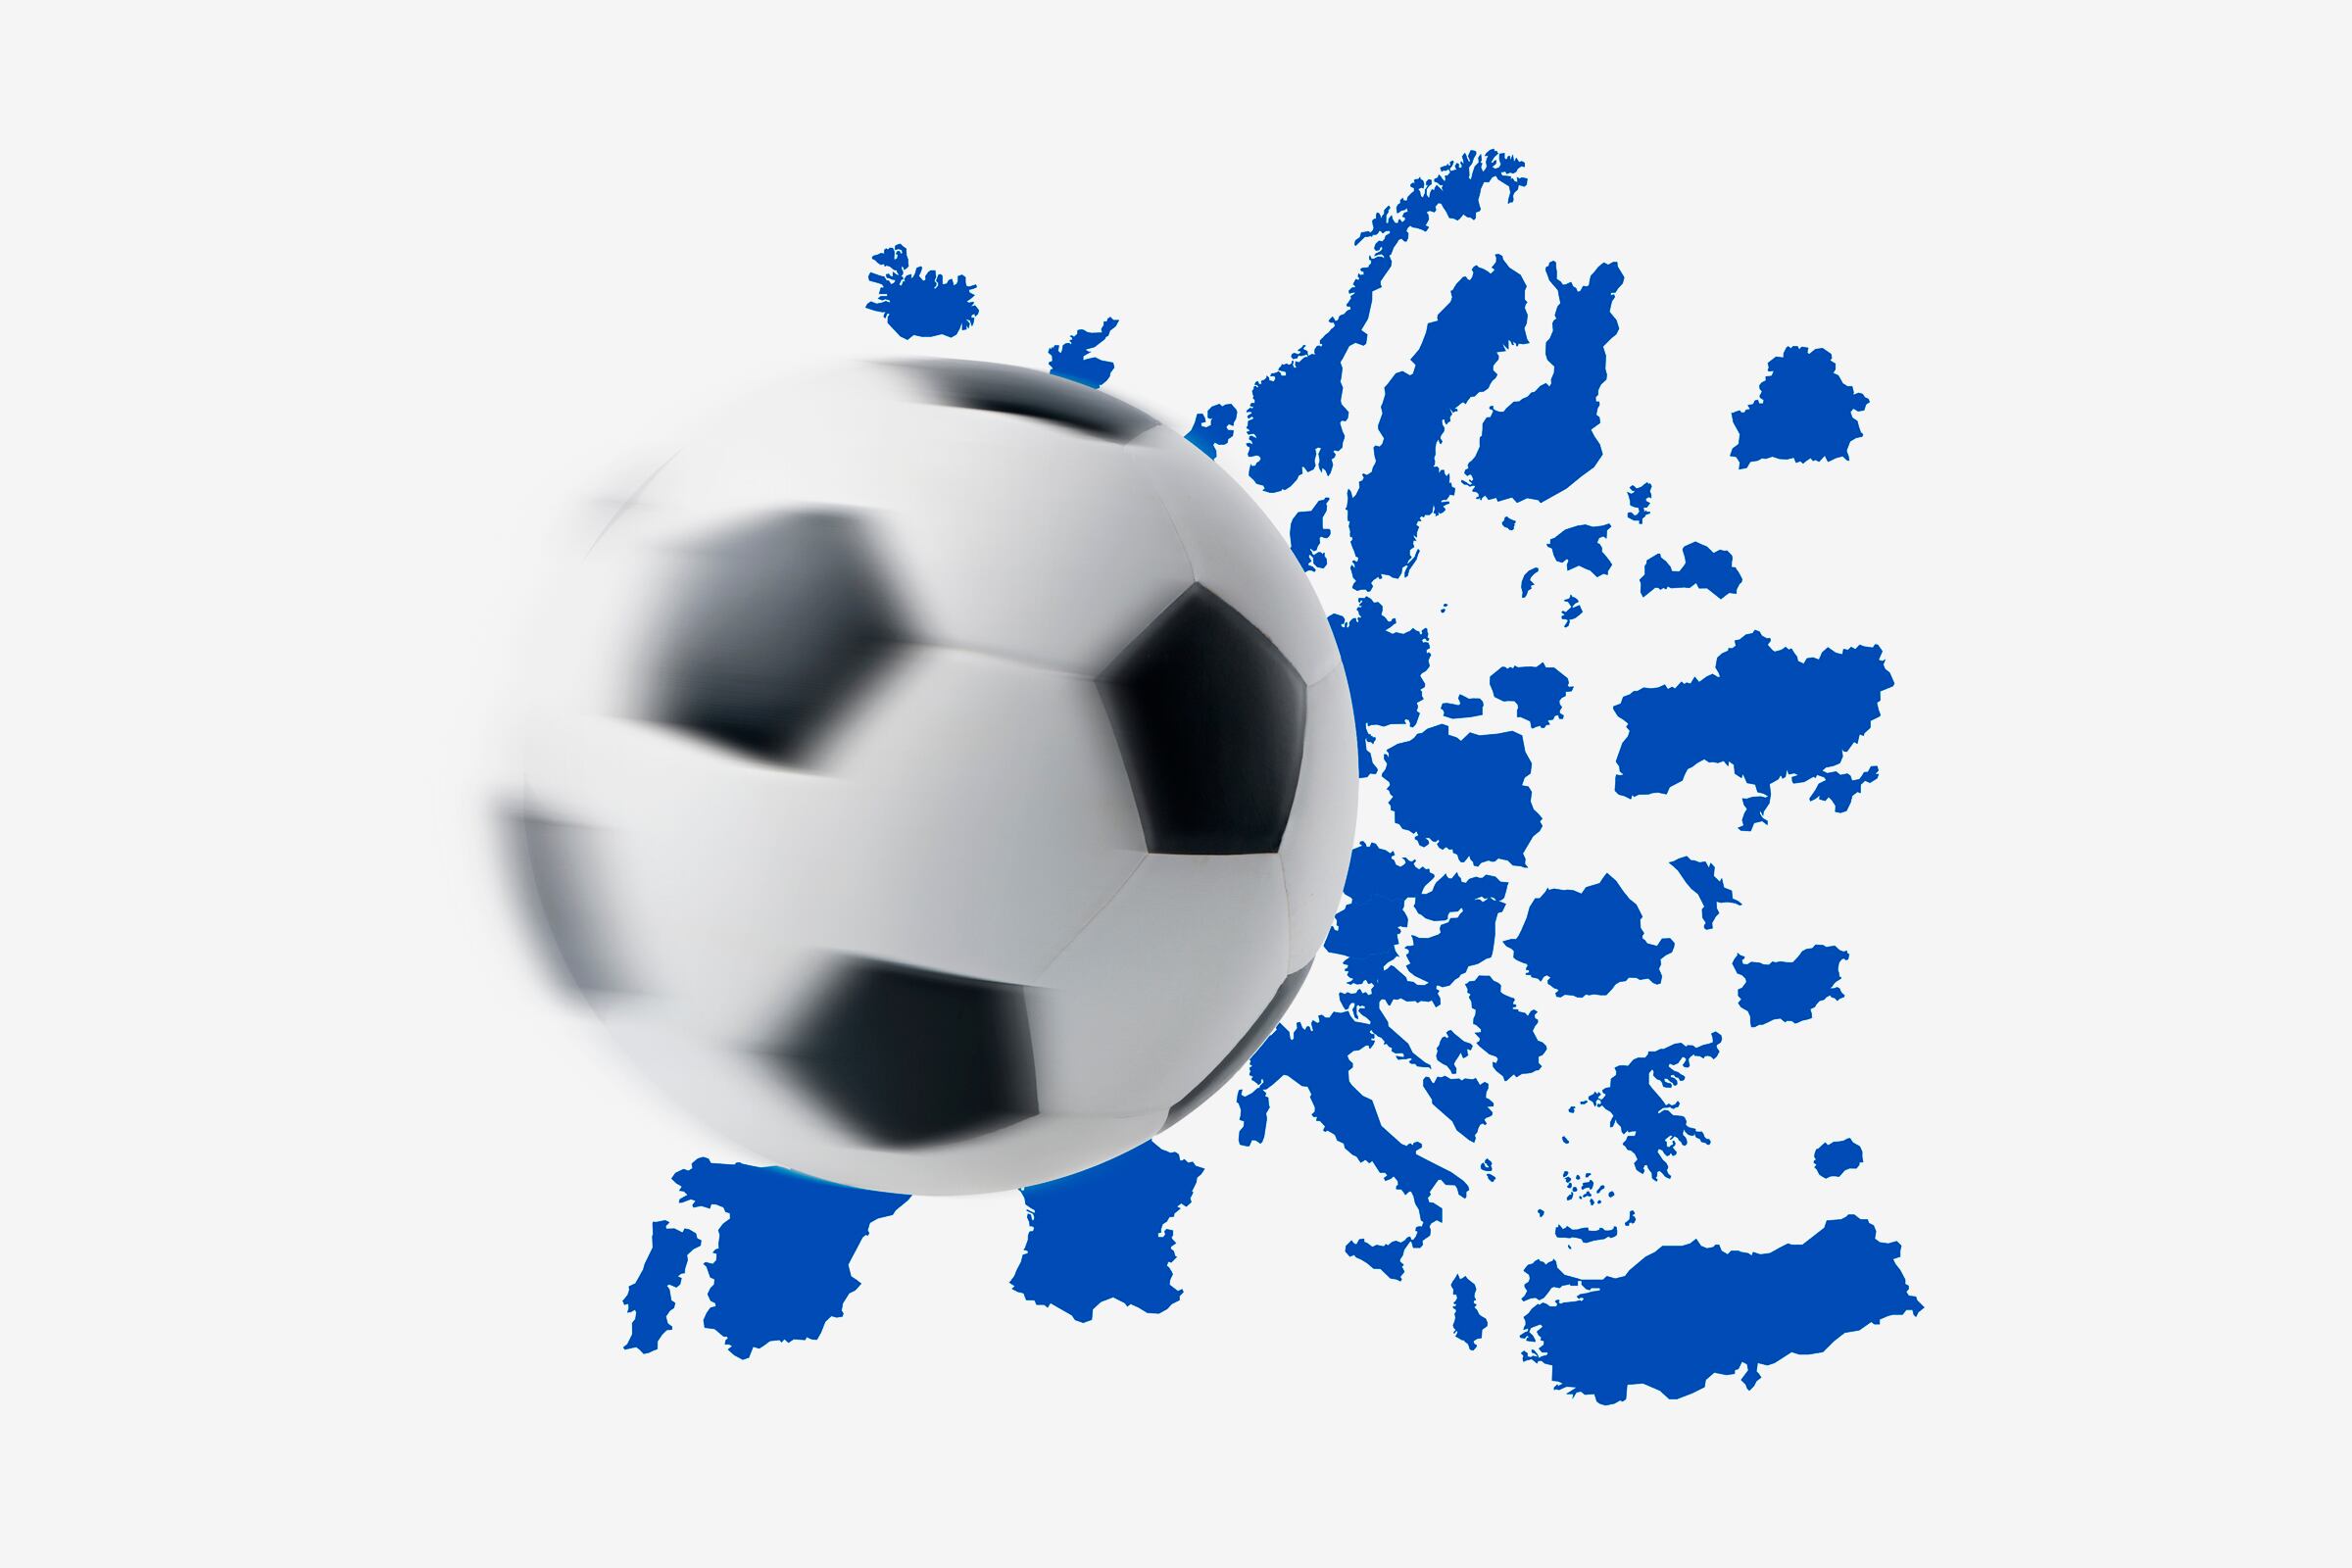 The EU is organized in a similar way to European soccer; each country strives to create the most powerful so-called economic “national champions," which then compete at the continental level.